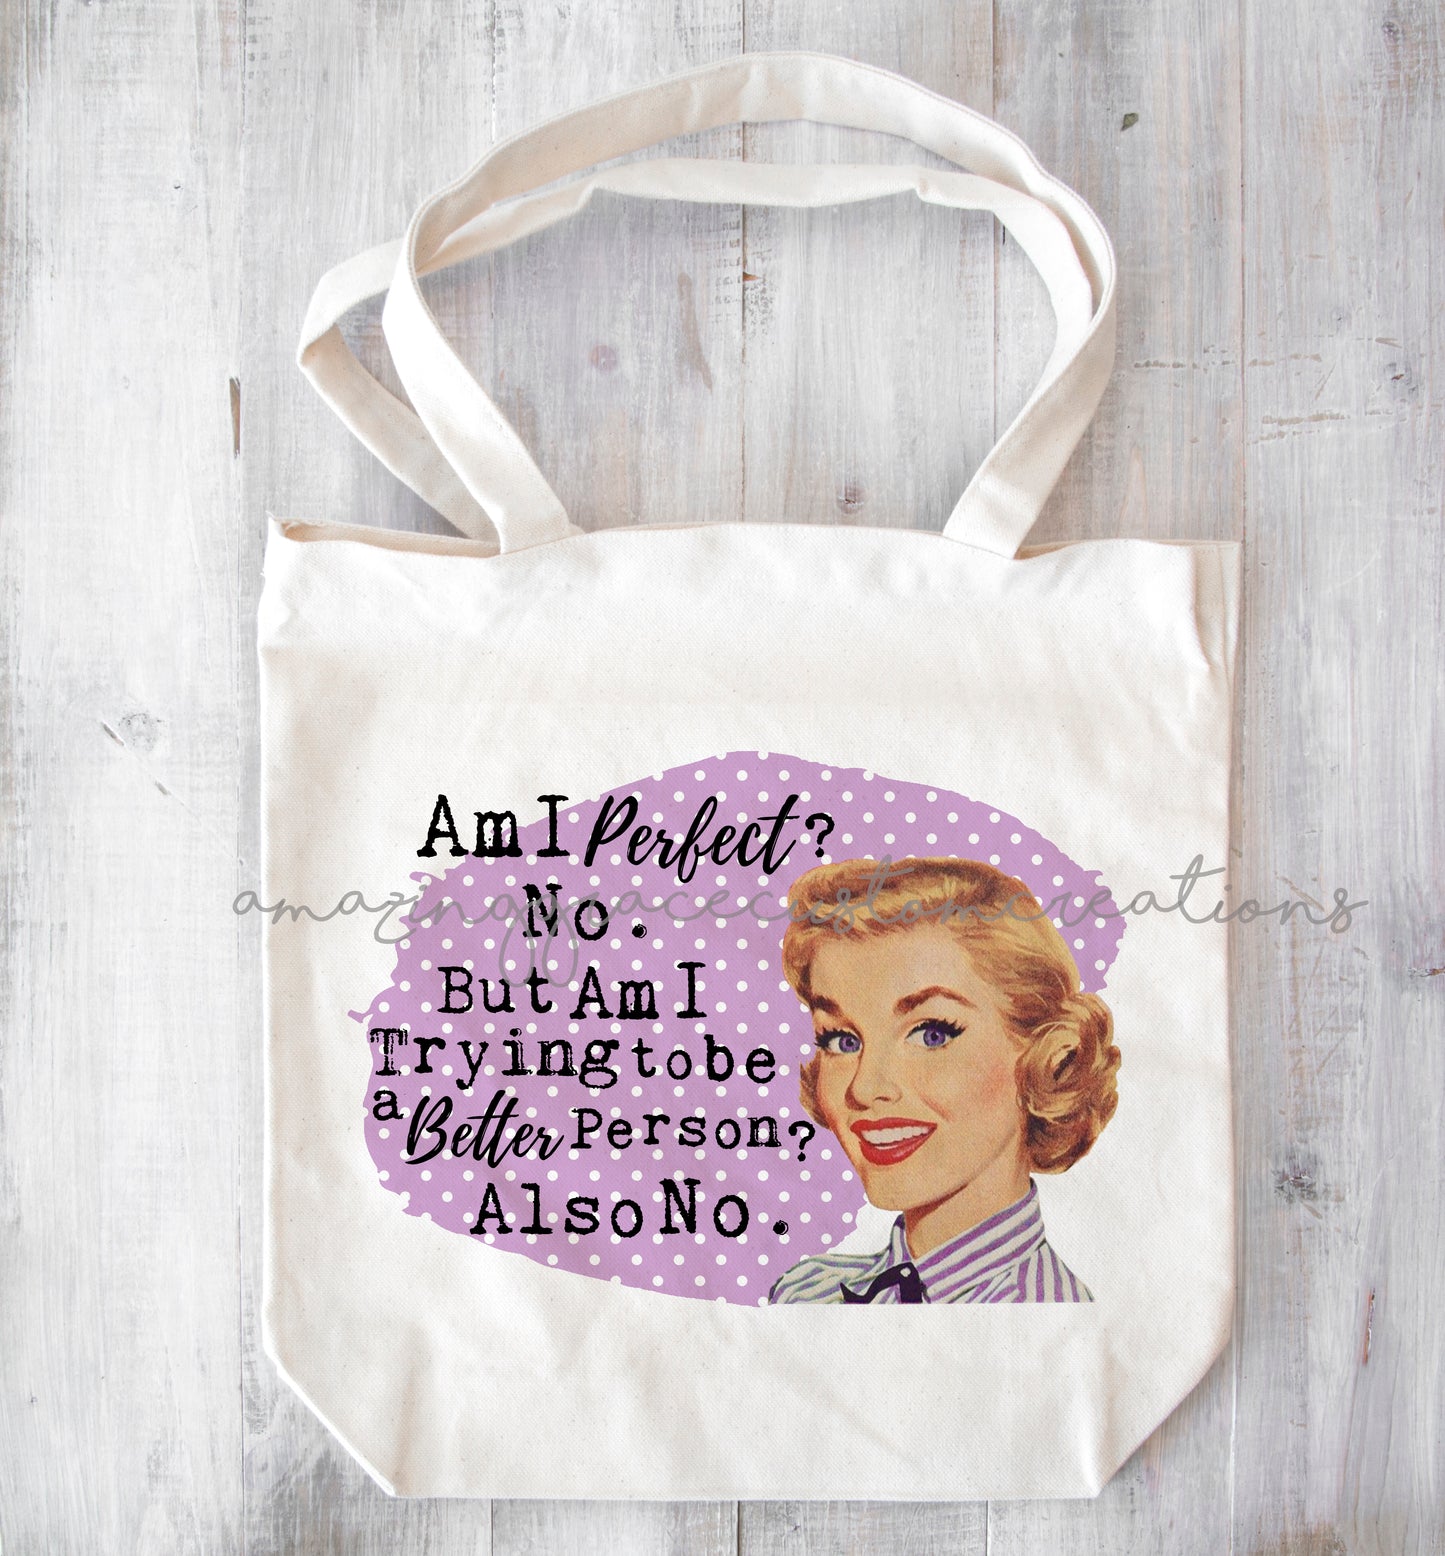 RETRO HOUSEWIVES tote bag